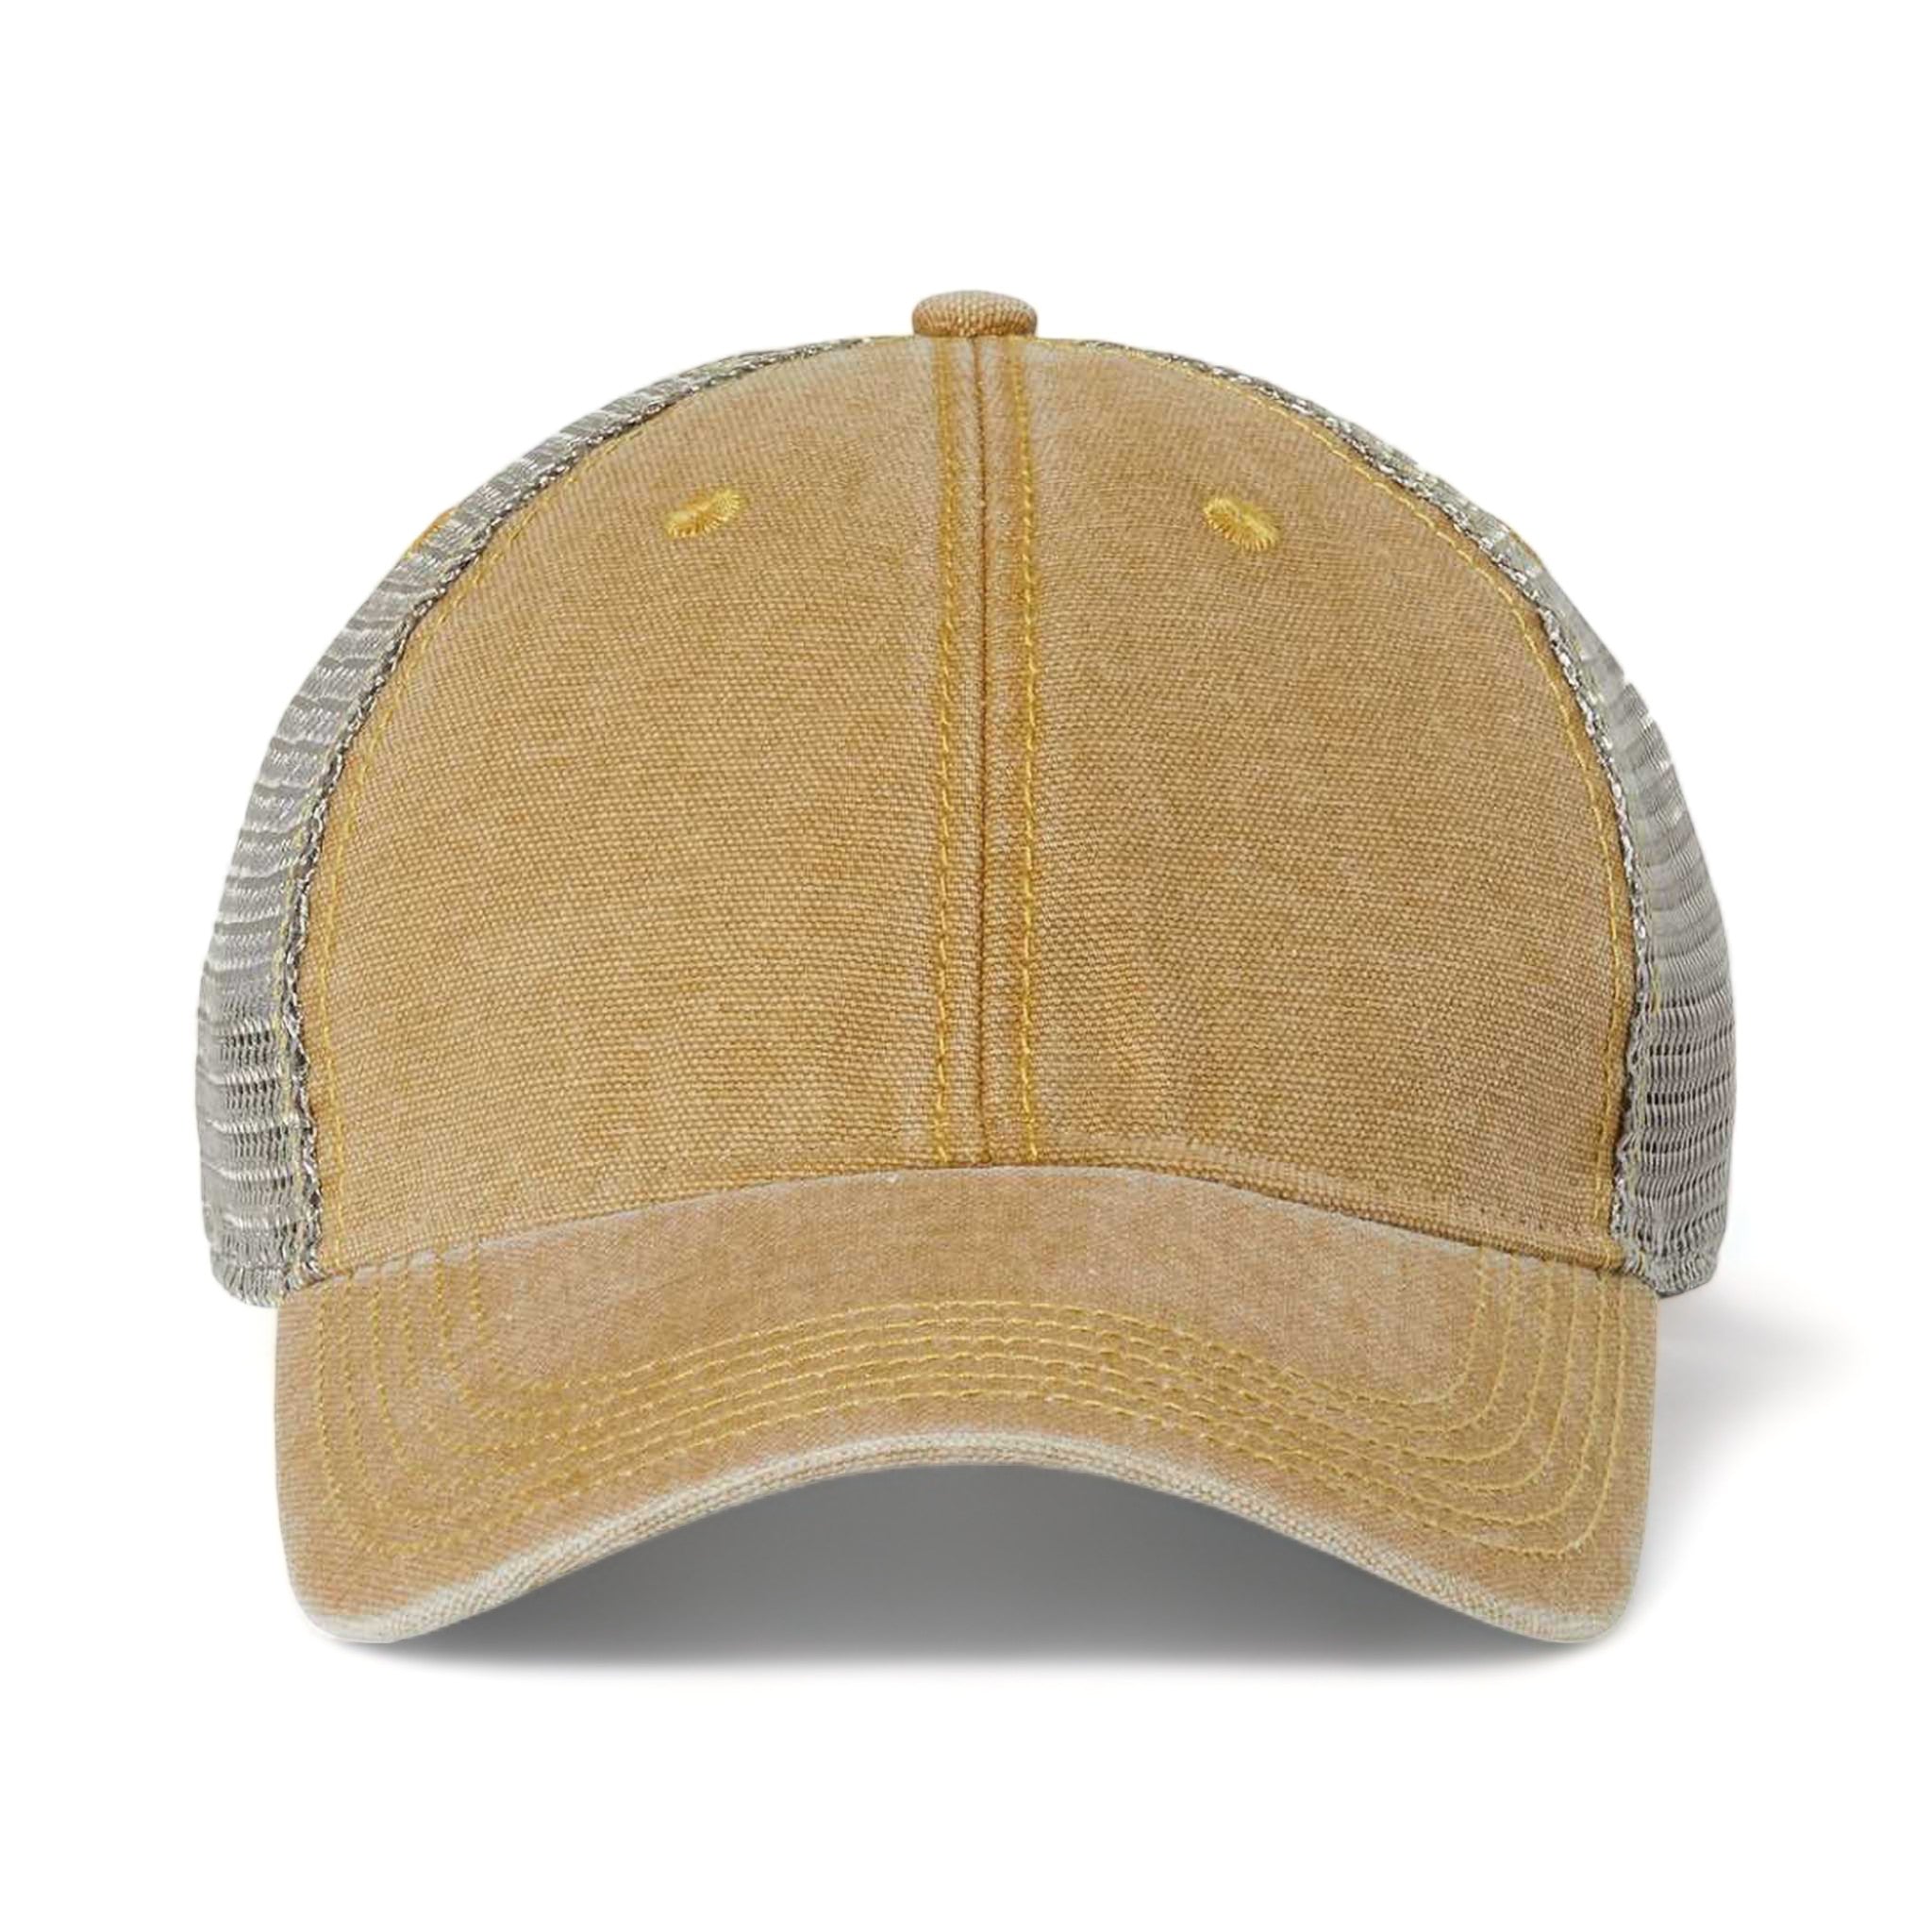 Front view of LEGACY DTA custom hat in khaki and grey